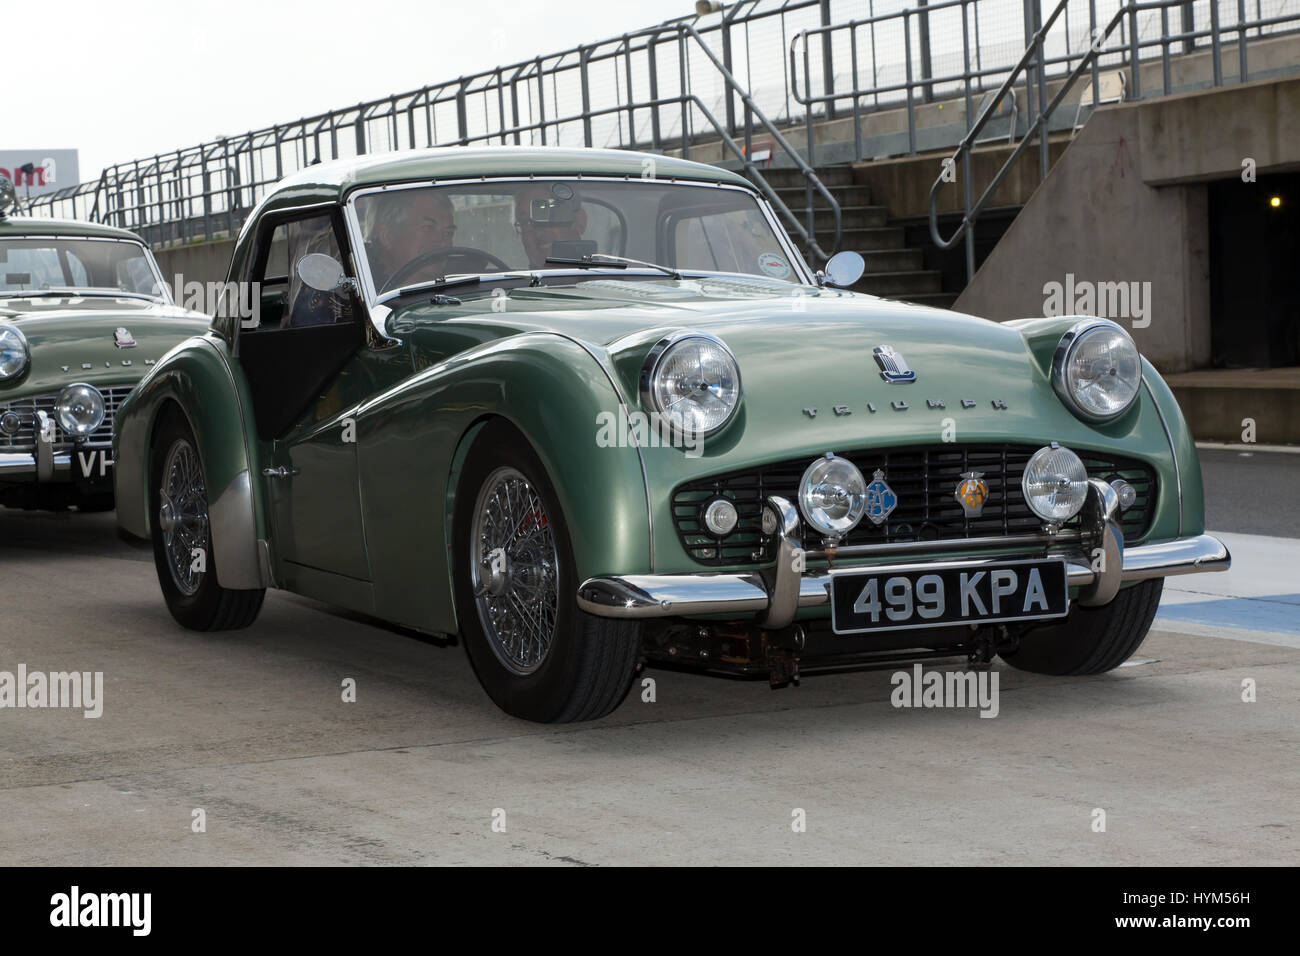 A Green, 1959 Triumph TR3  Sports Car, in the International Pit lane, during the Silverstone Classic Media Day Stock Photo